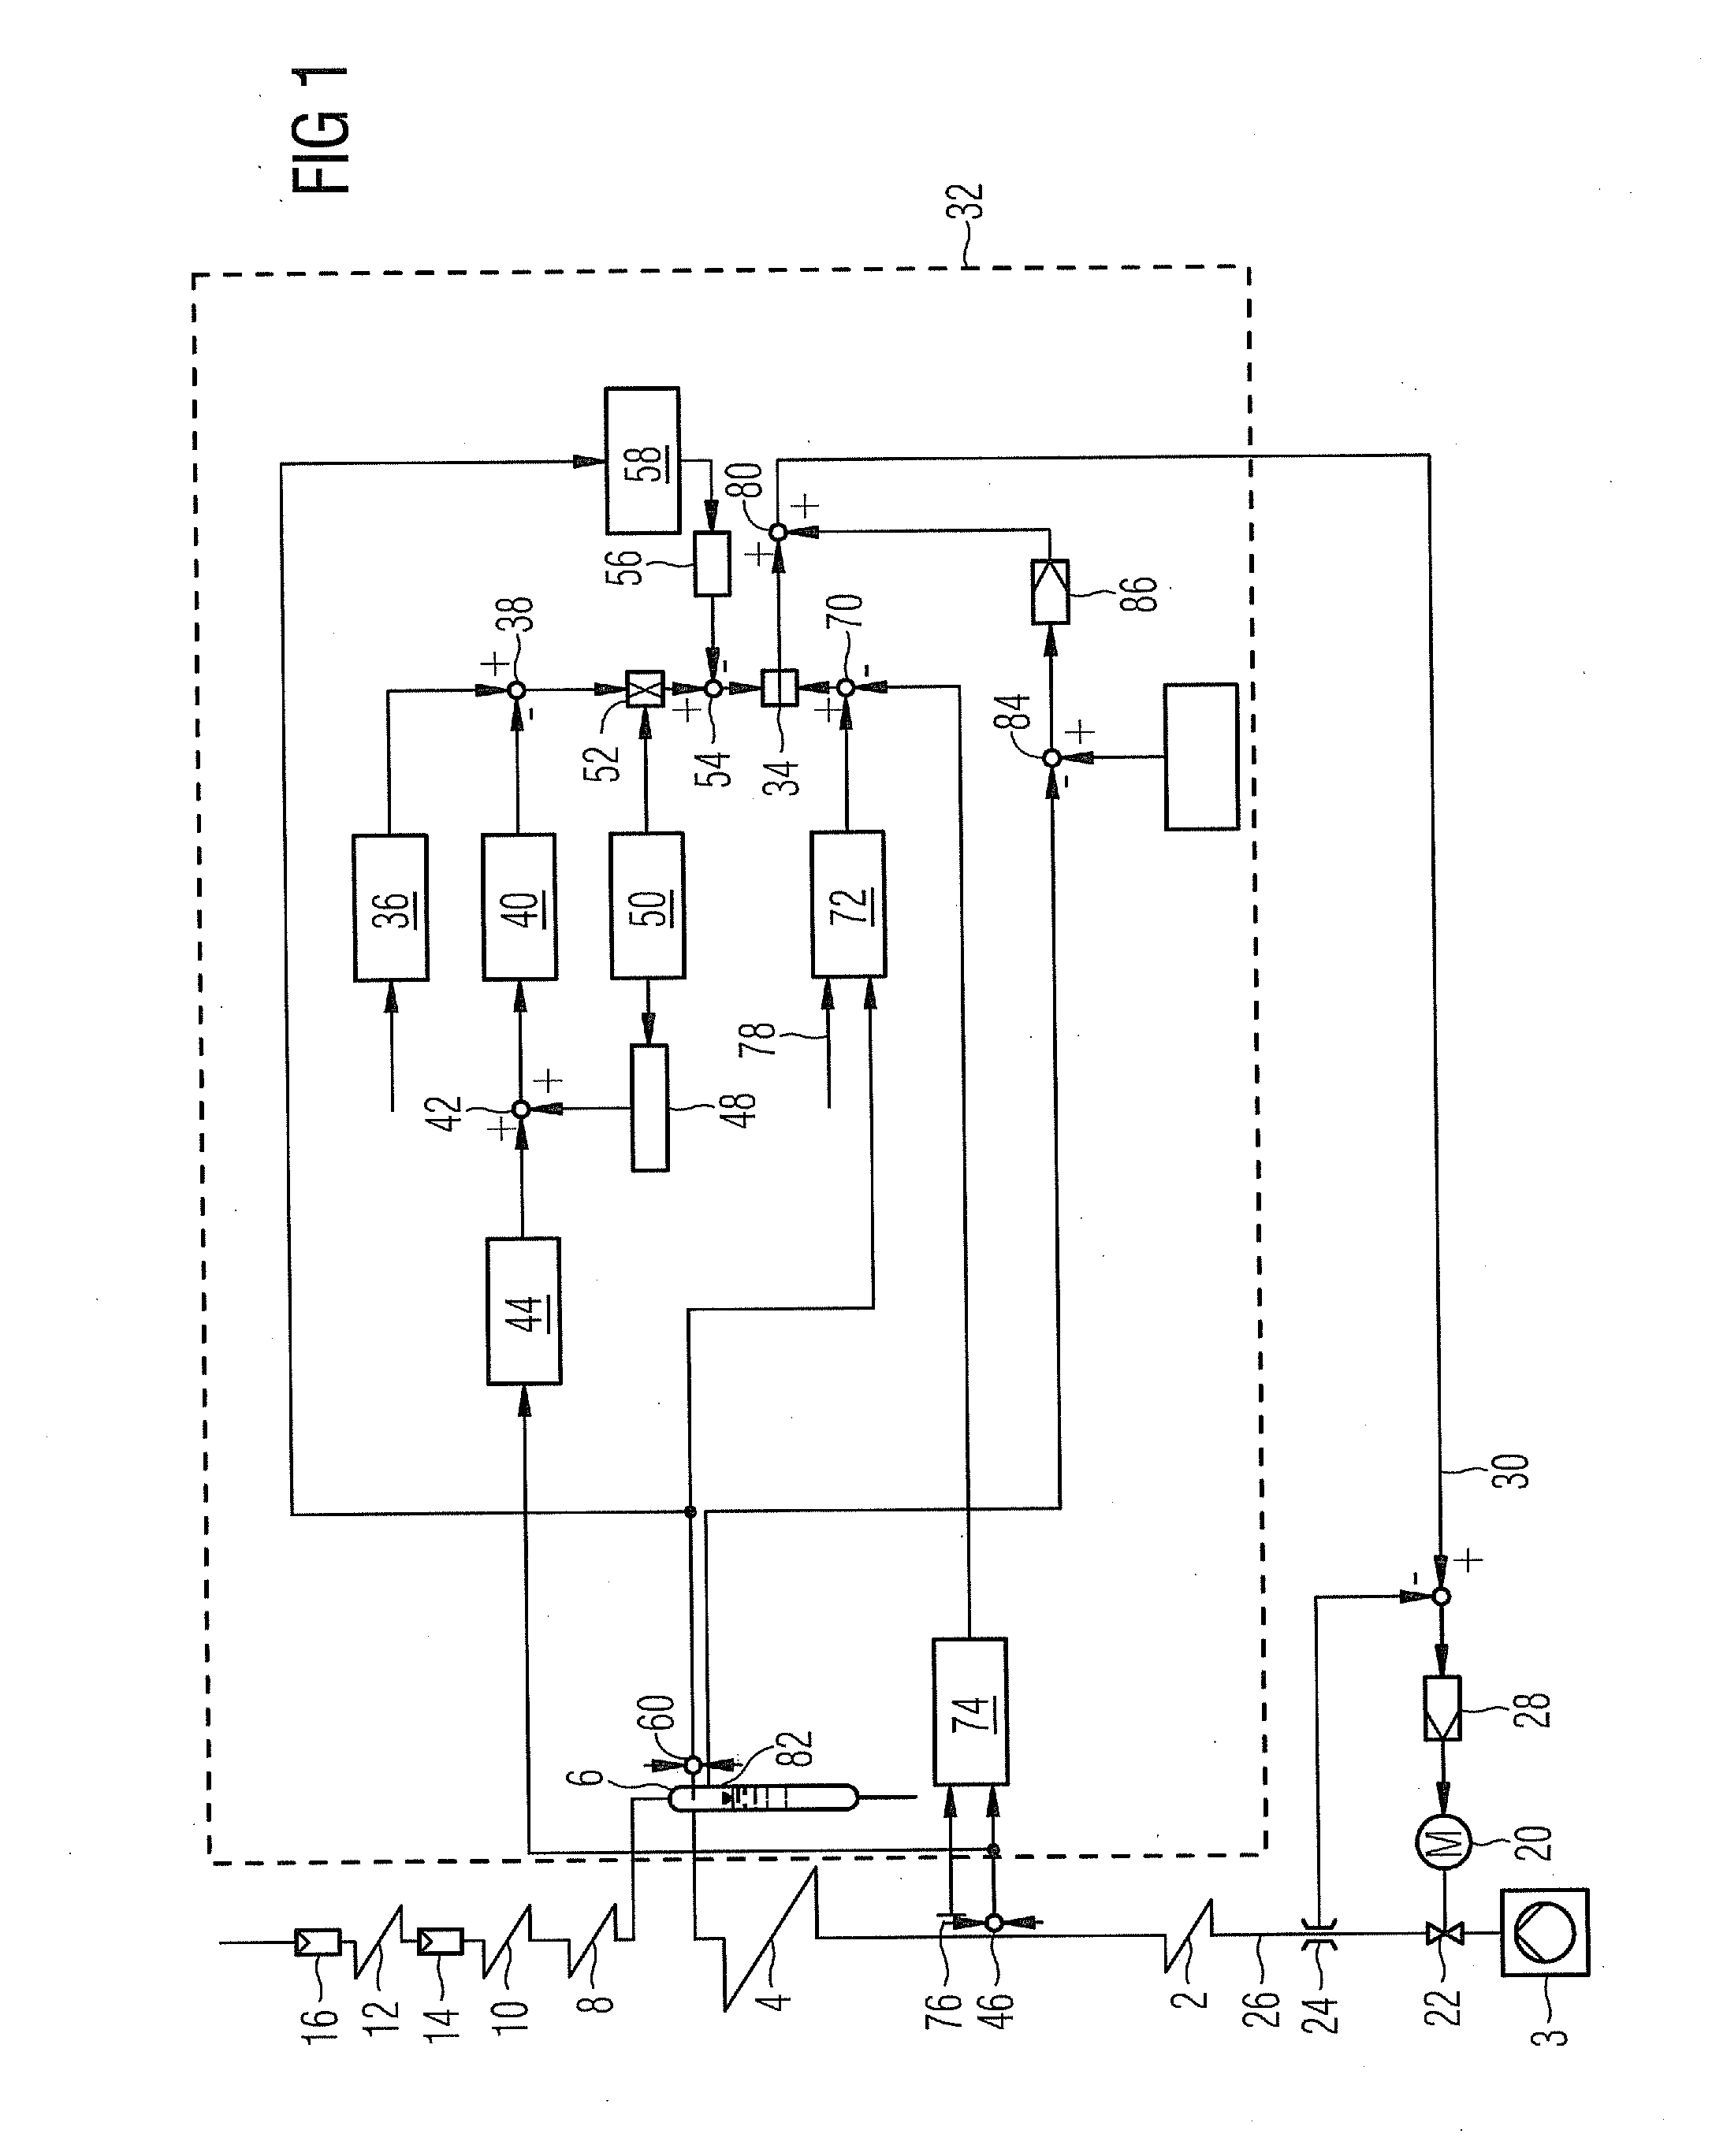 Method for operating a once-through steam generator and forced-flow steam generator